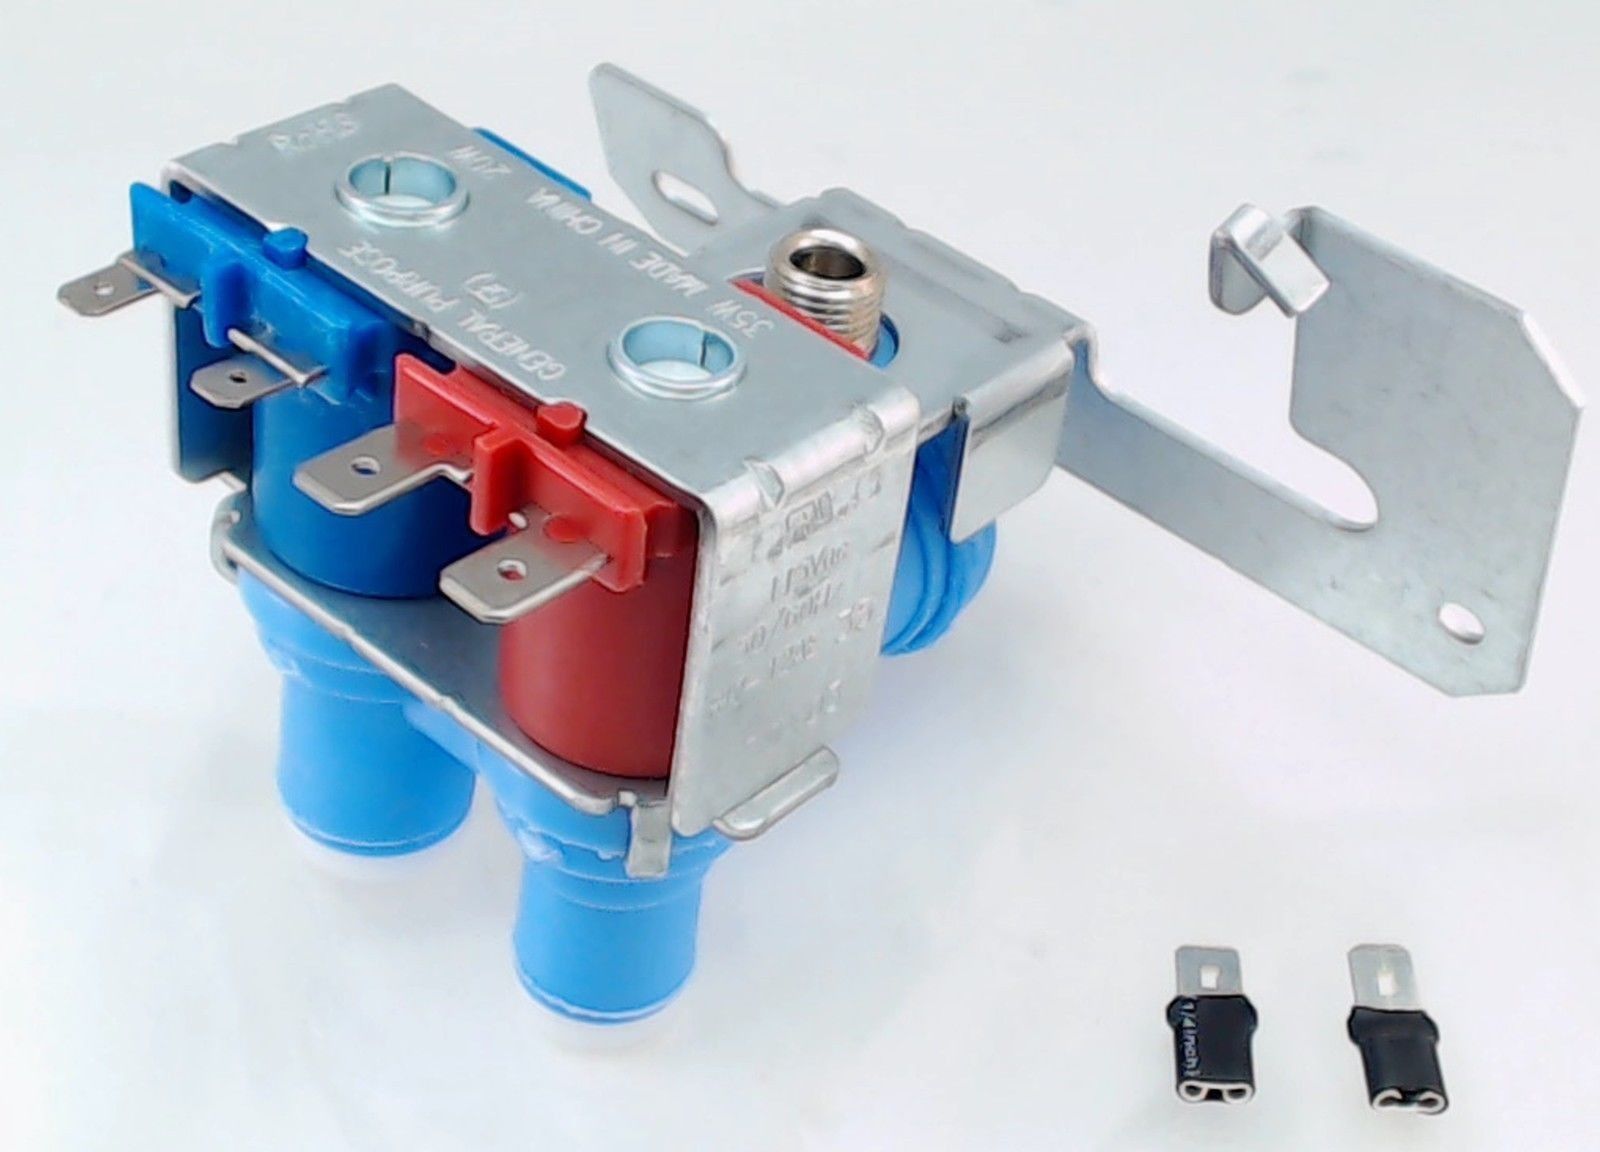 ERP WR57X10051 Refrigerator Water Valve (Replacement for GE WR57X10051) - image 2 of 4